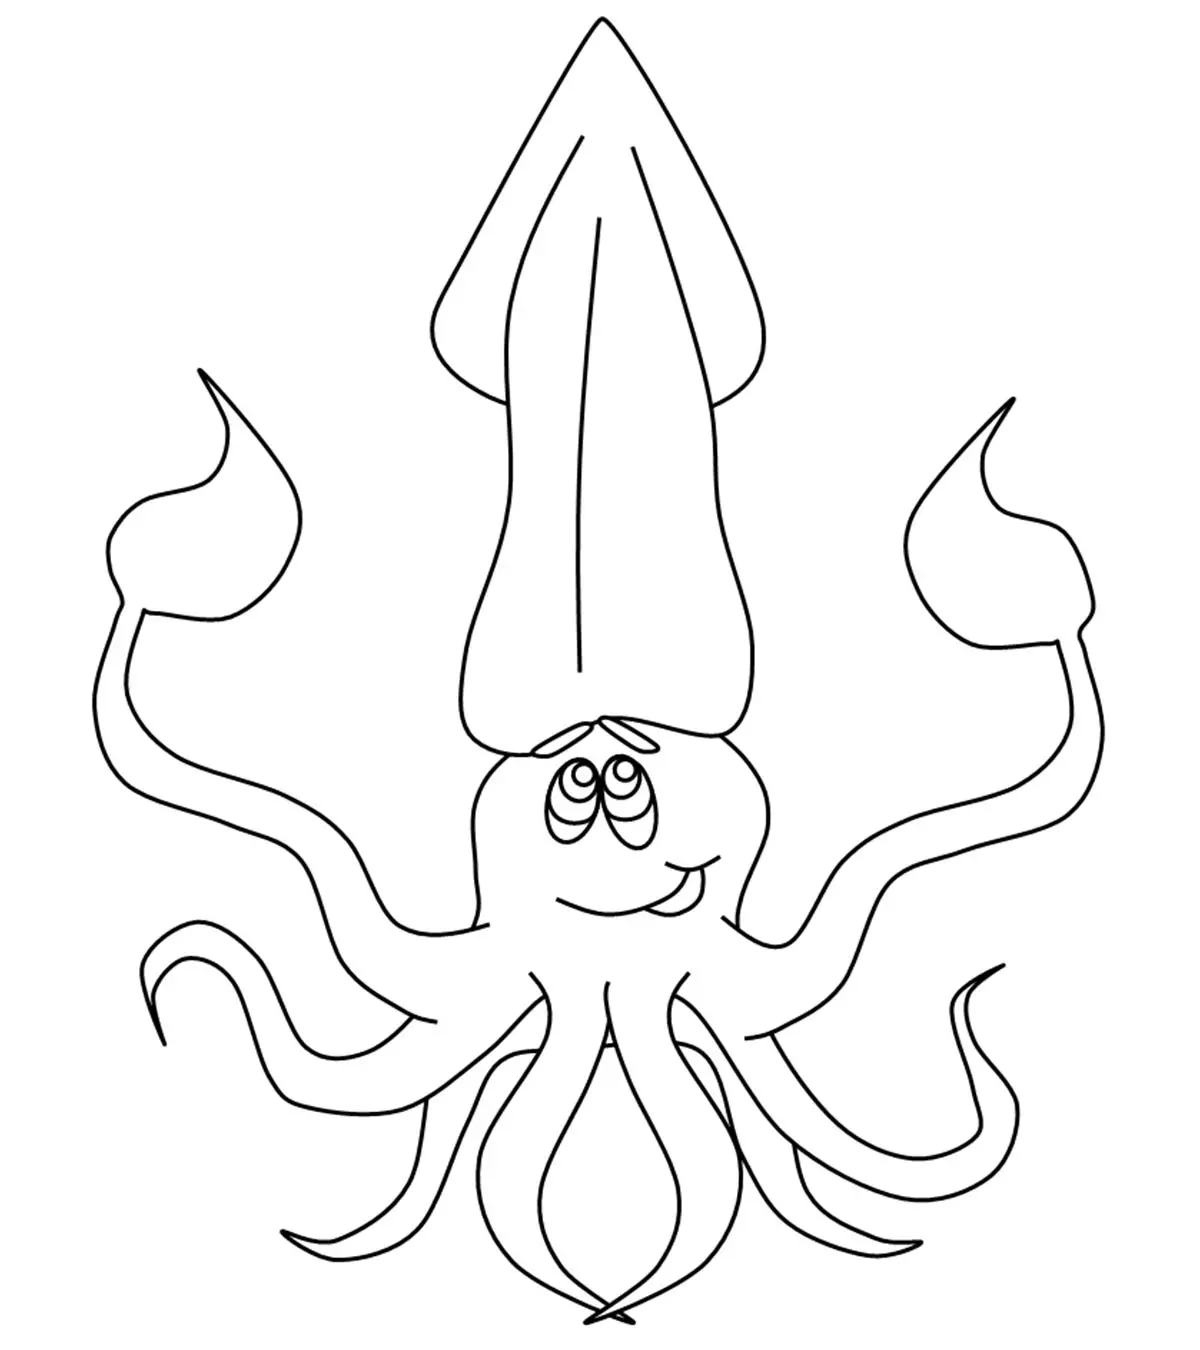 Top 10 Squid Coloring Pages for Toddlers